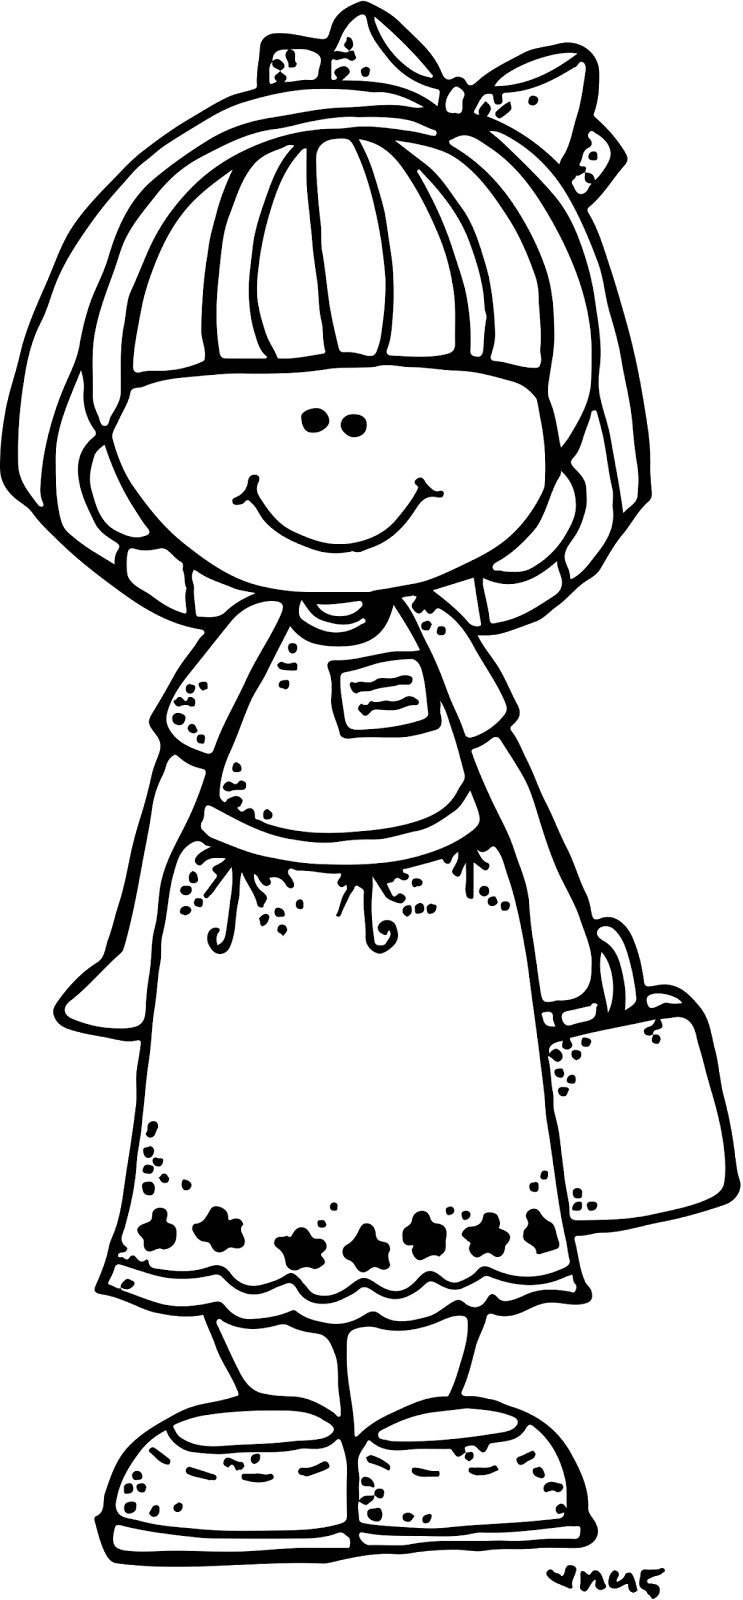 June clipart black and white. Melonheadz lds illustrating primary